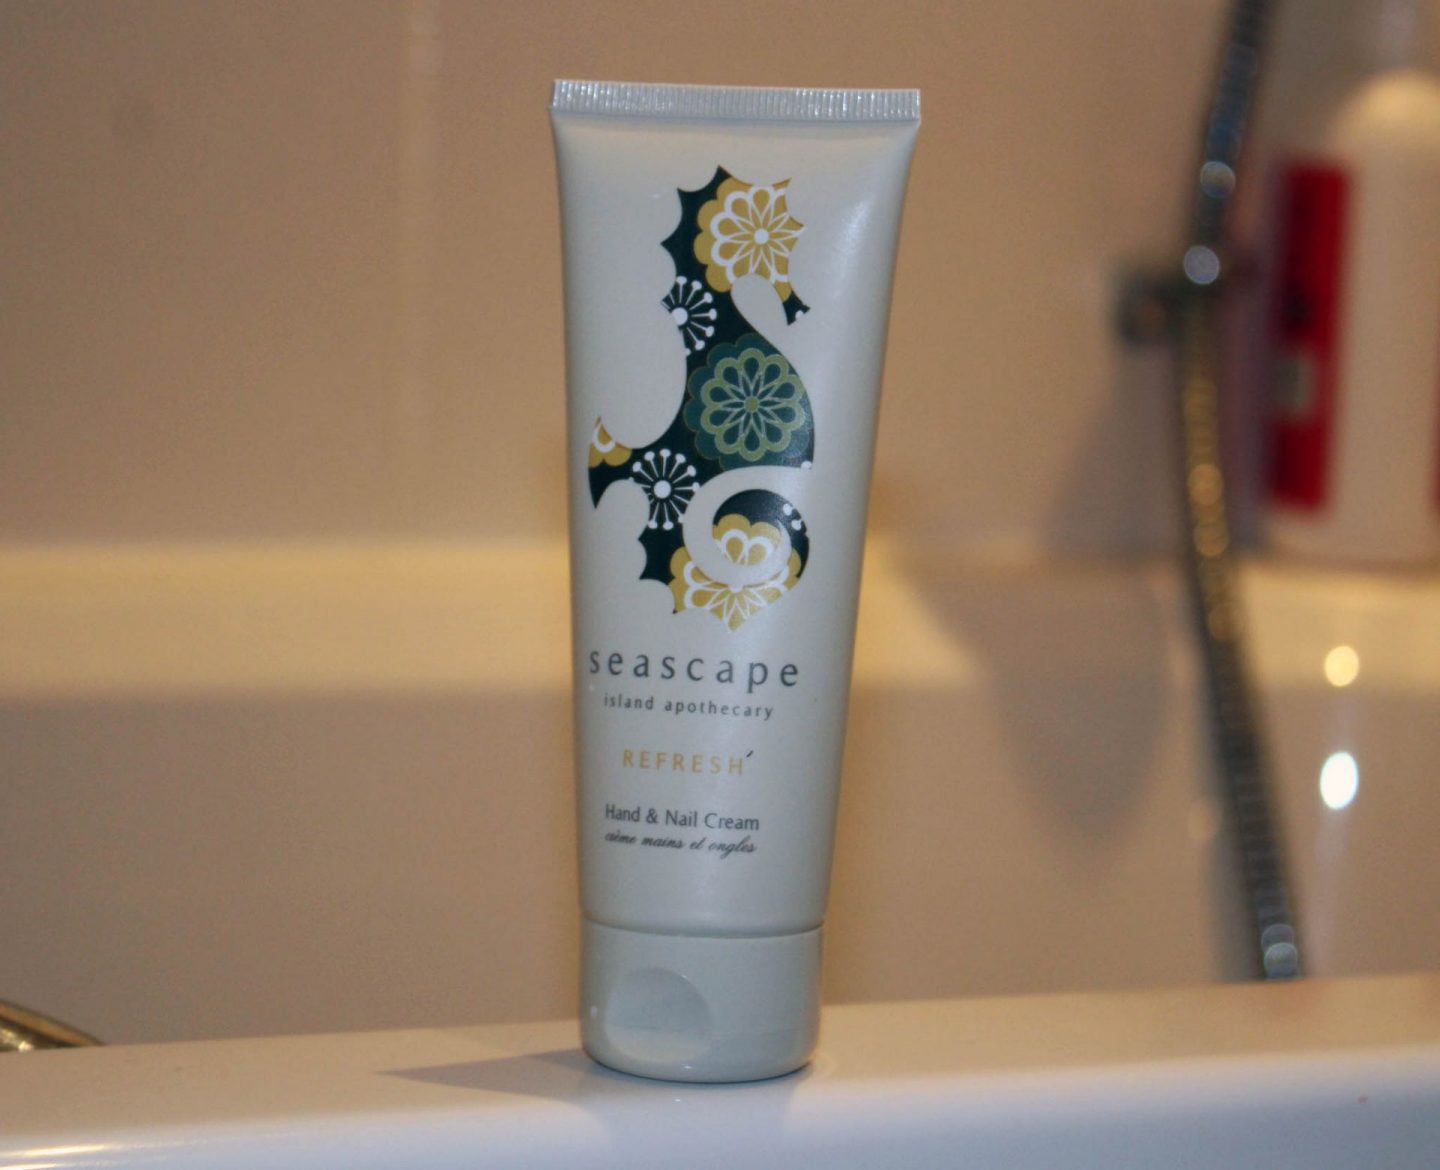 Seascape Refresh hand and nail cream